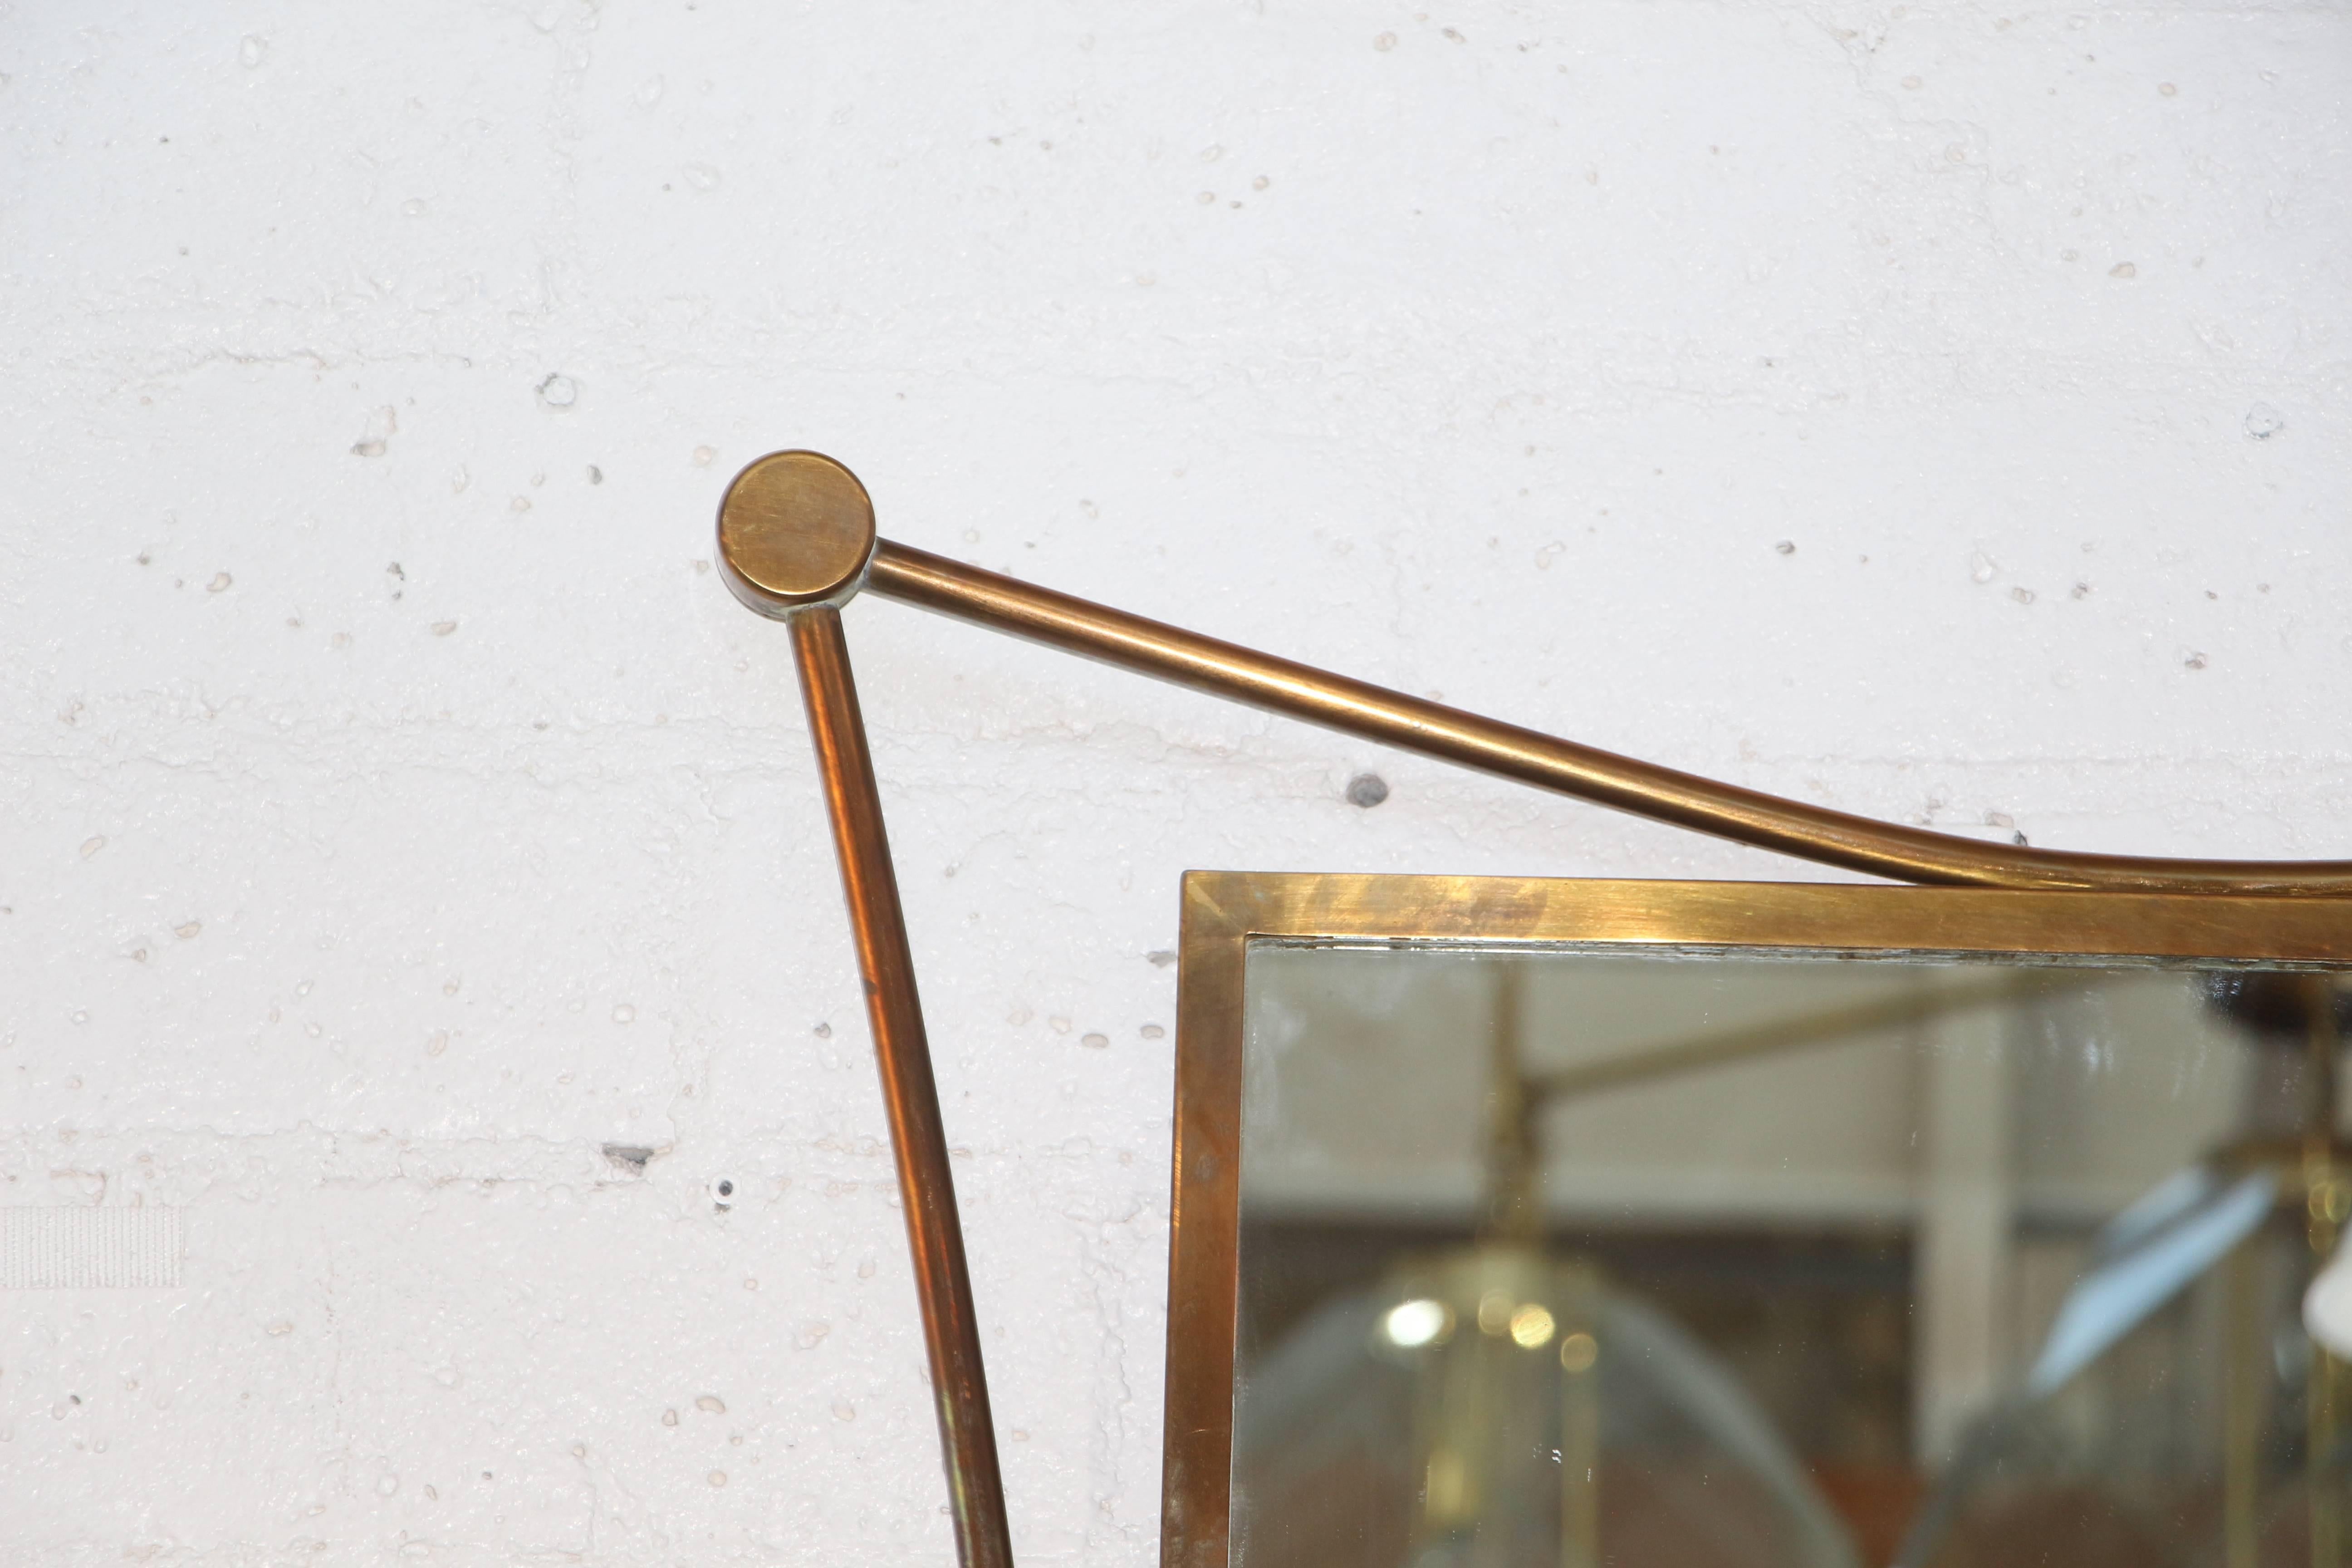 A highly Stylized brass mirror likely from the 1950's in the manner of Ico Parisi or possible even Gio Ponti. The wood back which is pictured shows it's age. Some of the screws have been replaced. The Mirror is in age appropriate condition, with